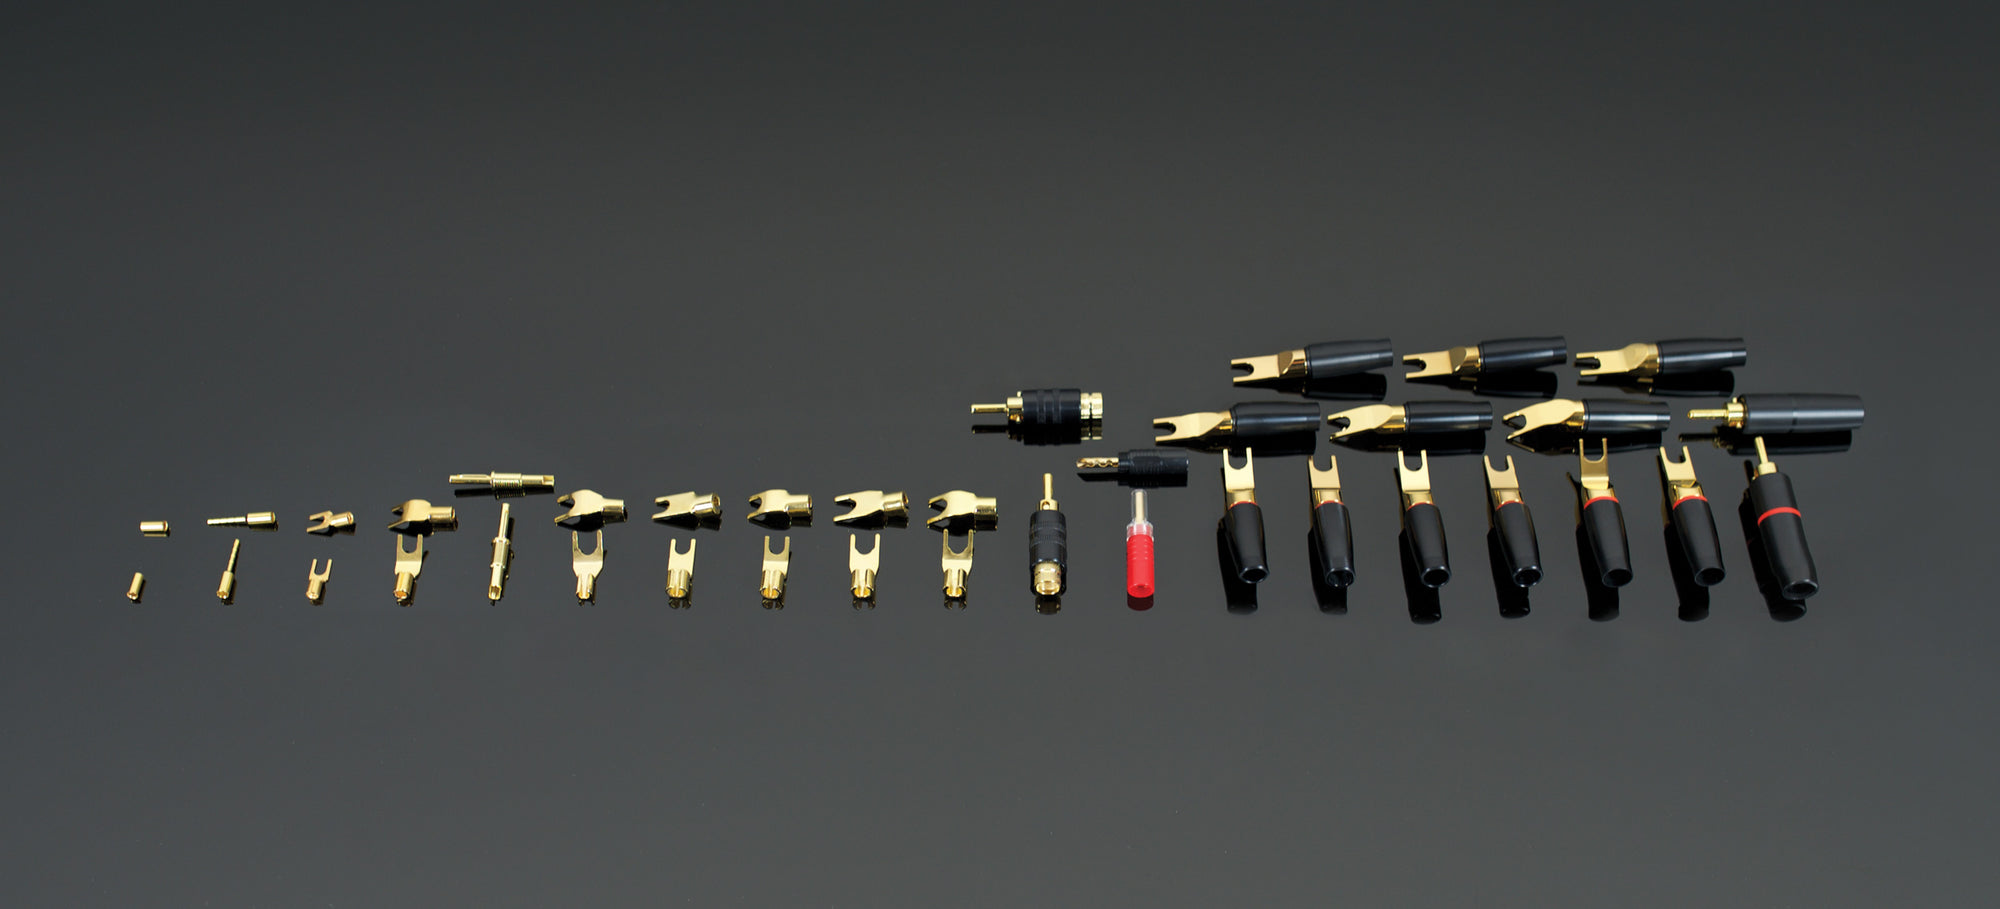 A group of black and gold tools on a black surface.